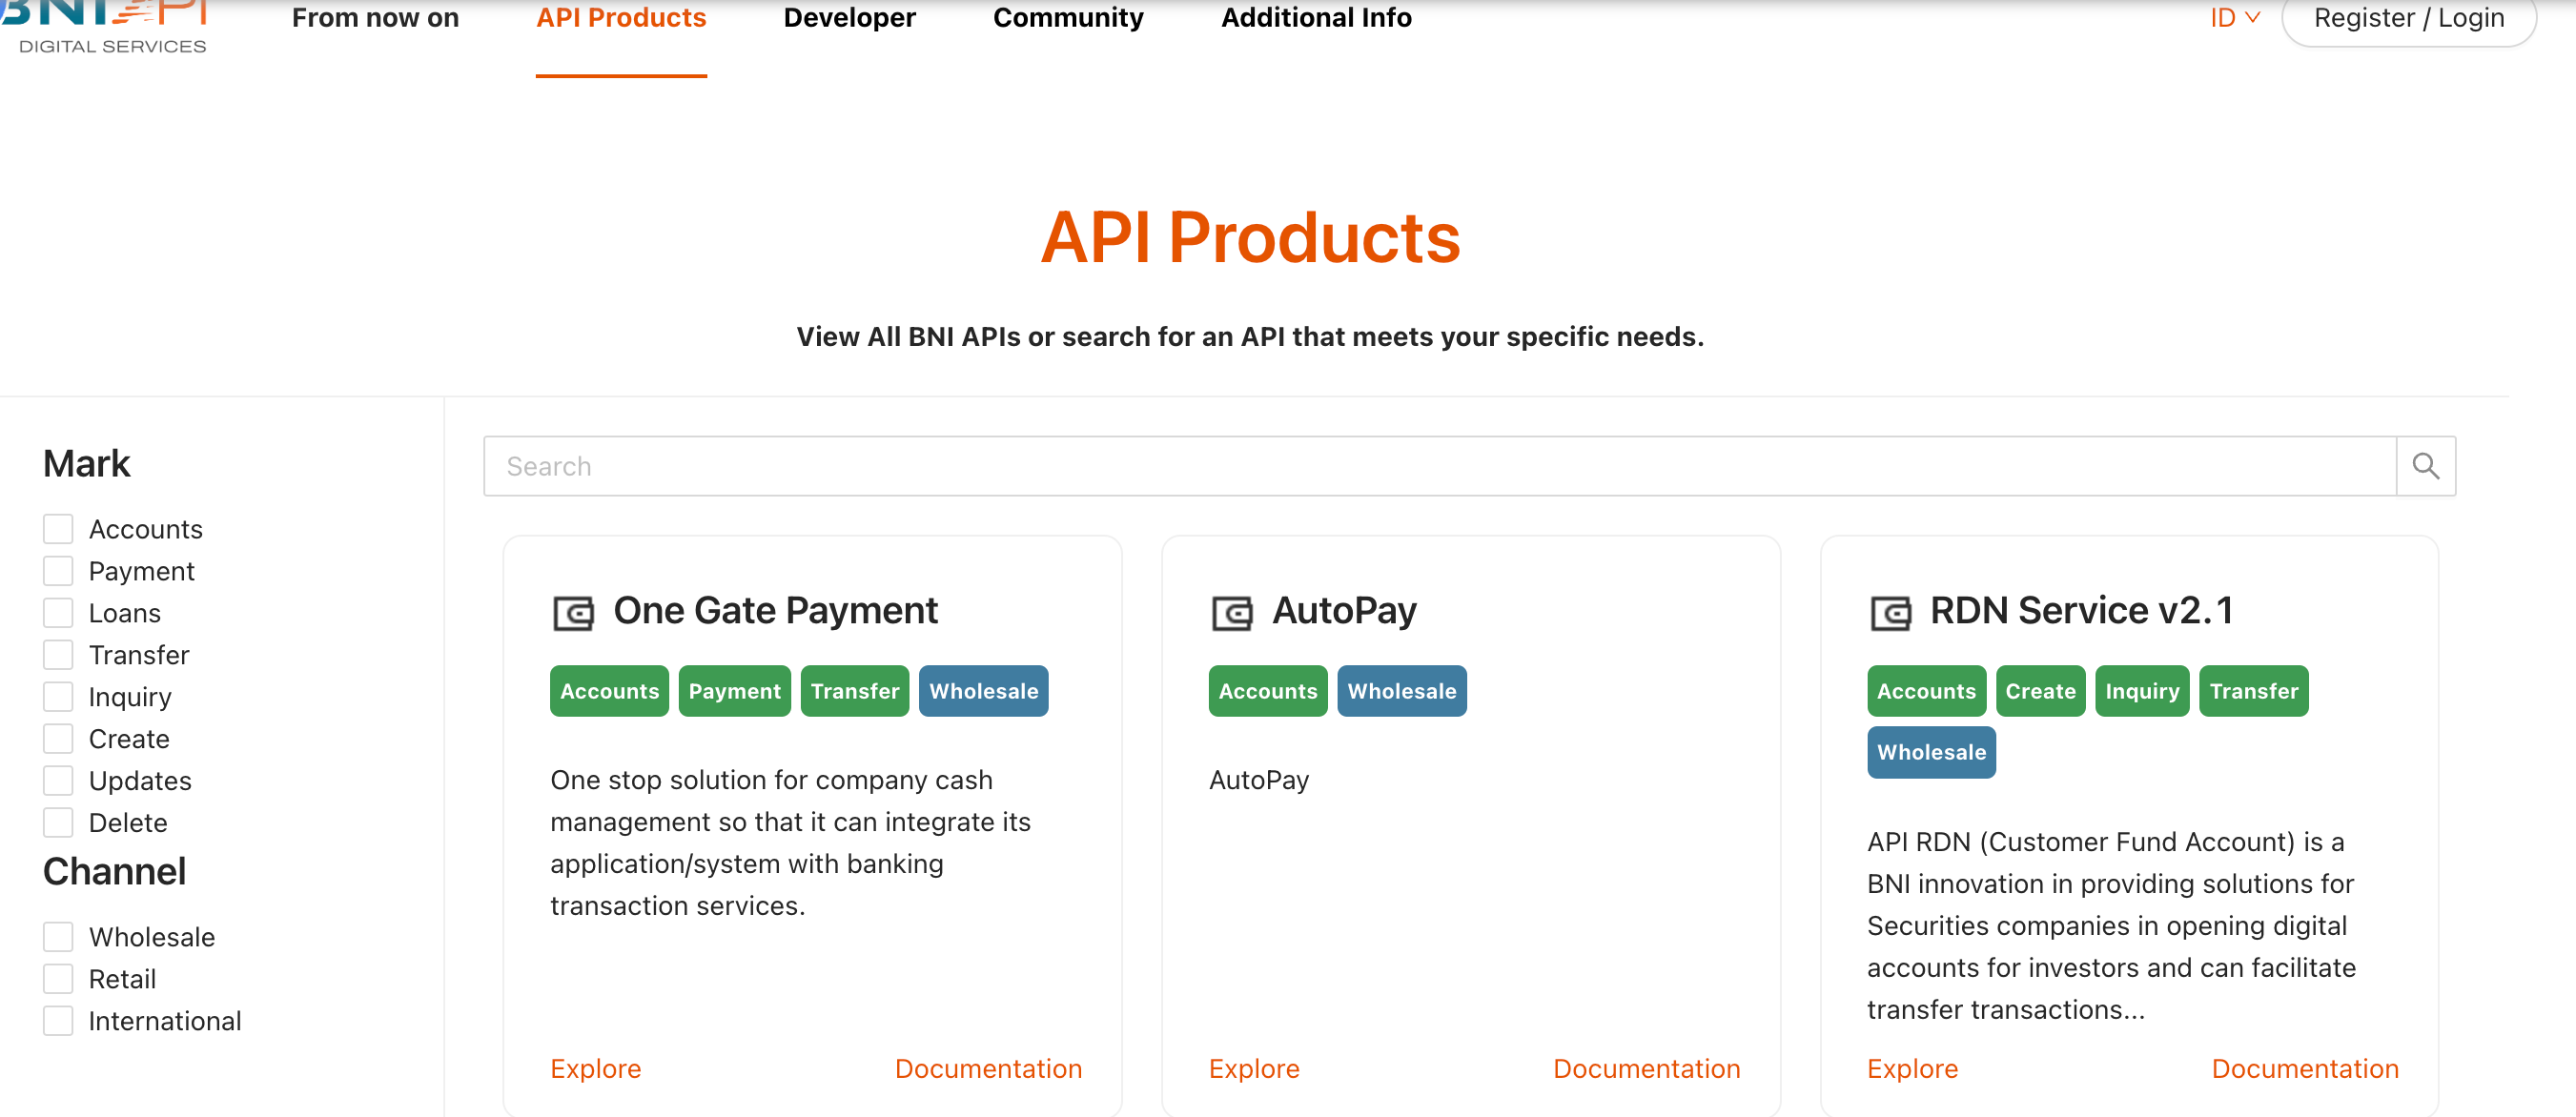 The list of BNI's API products in English. 